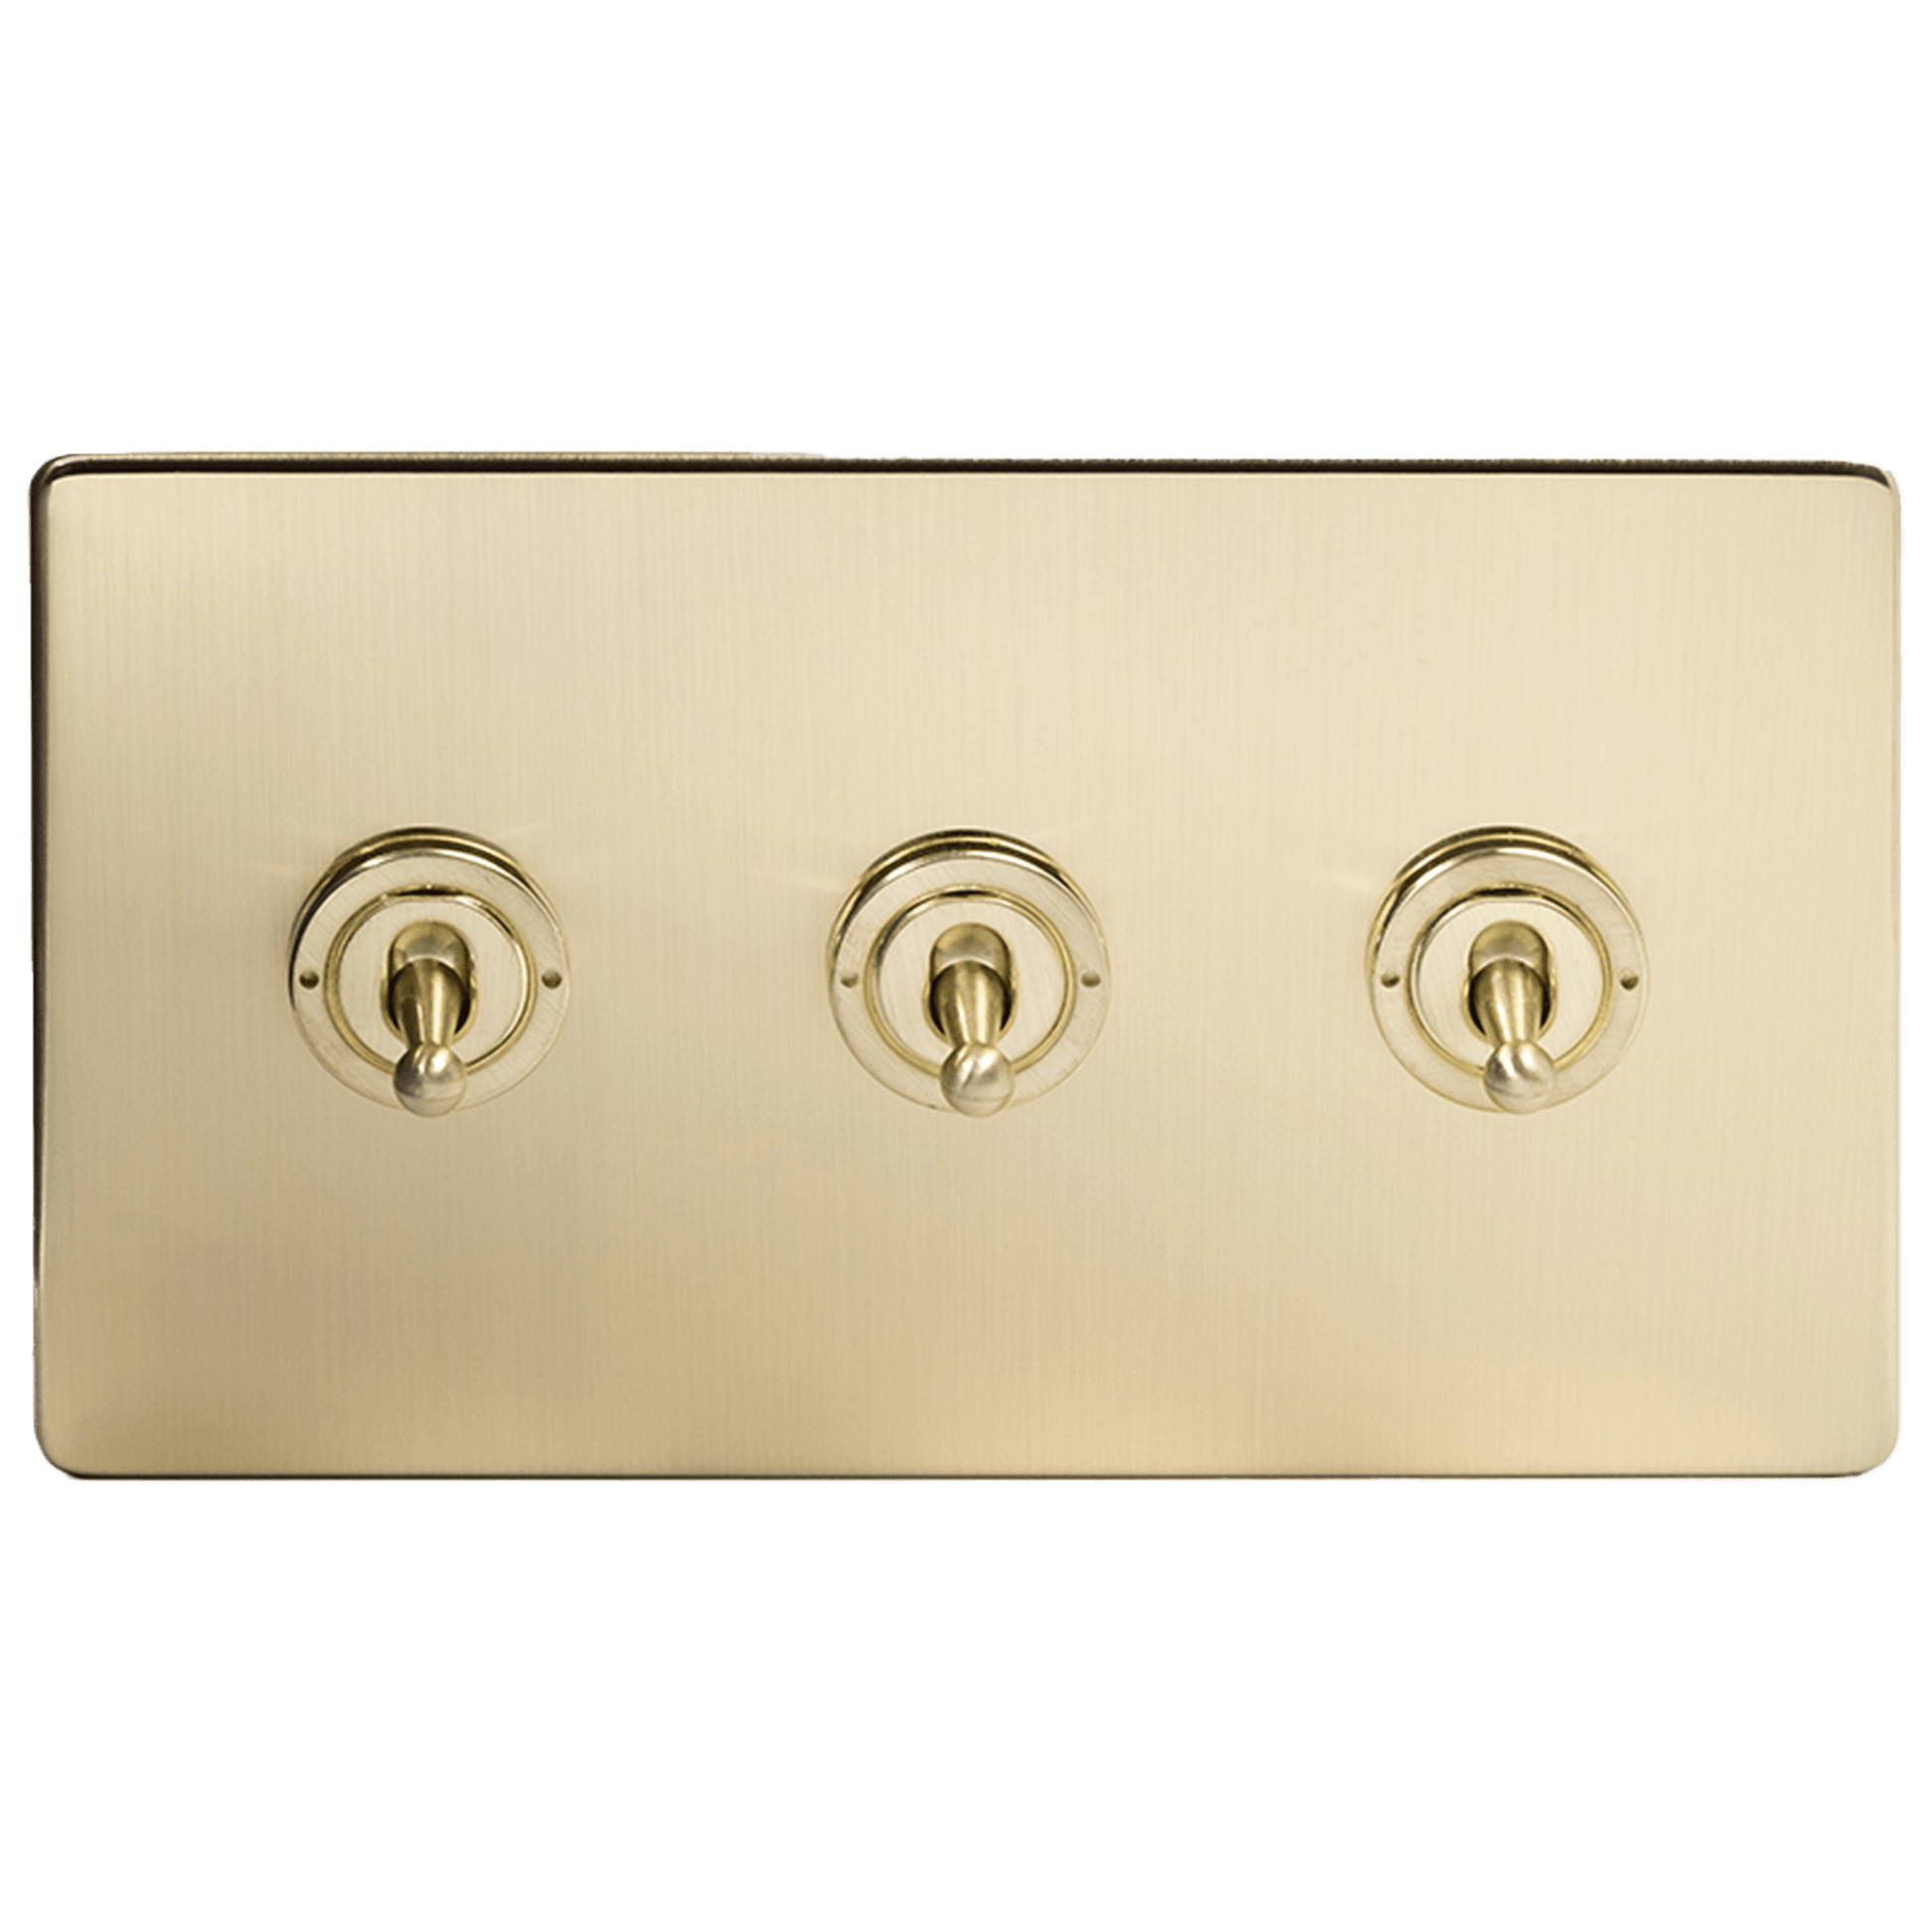 Brushed Brass Dimming Toggle Light Switch - Bilden Home & Hardware Market